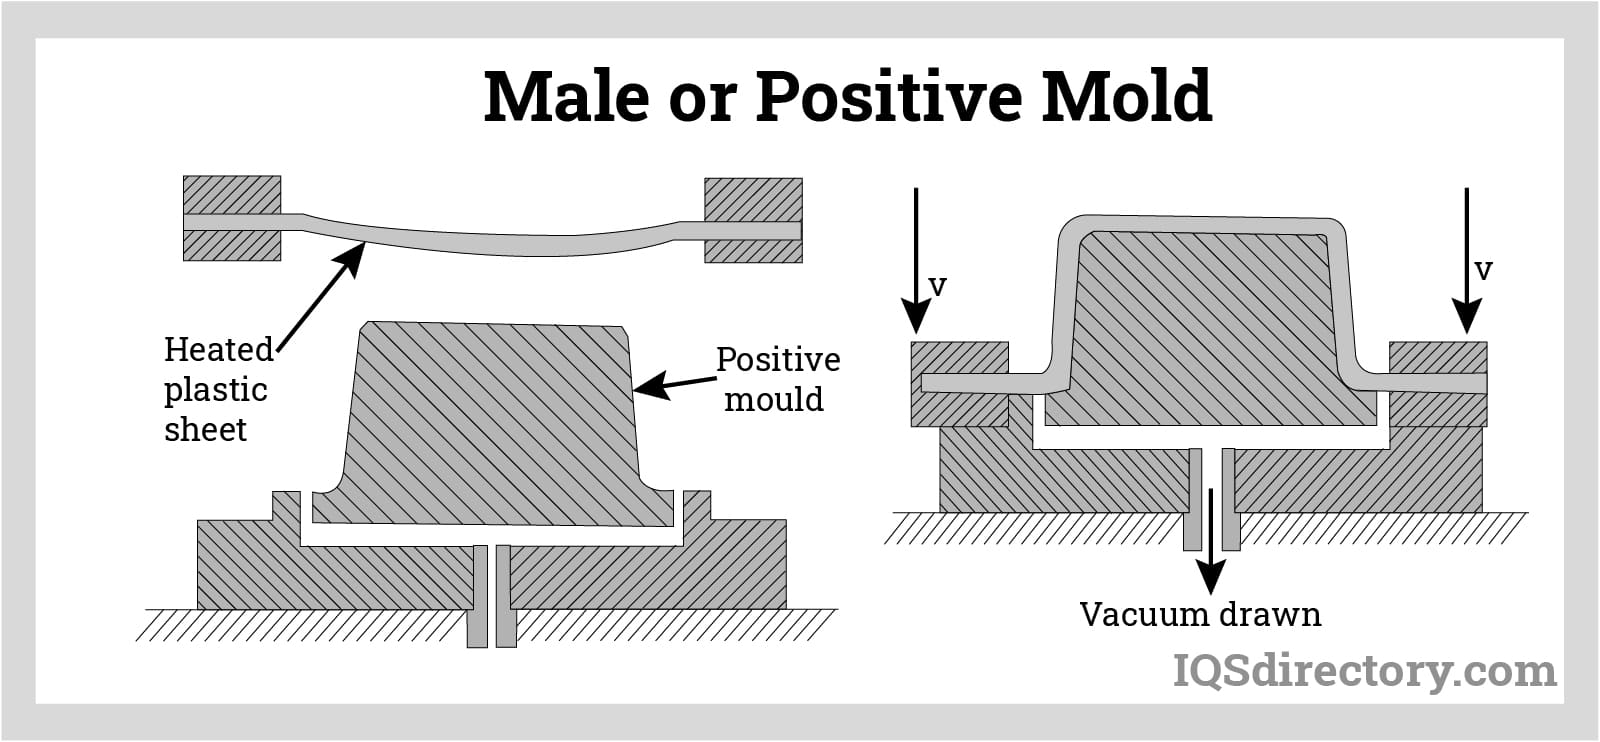 Male or Positive Mold